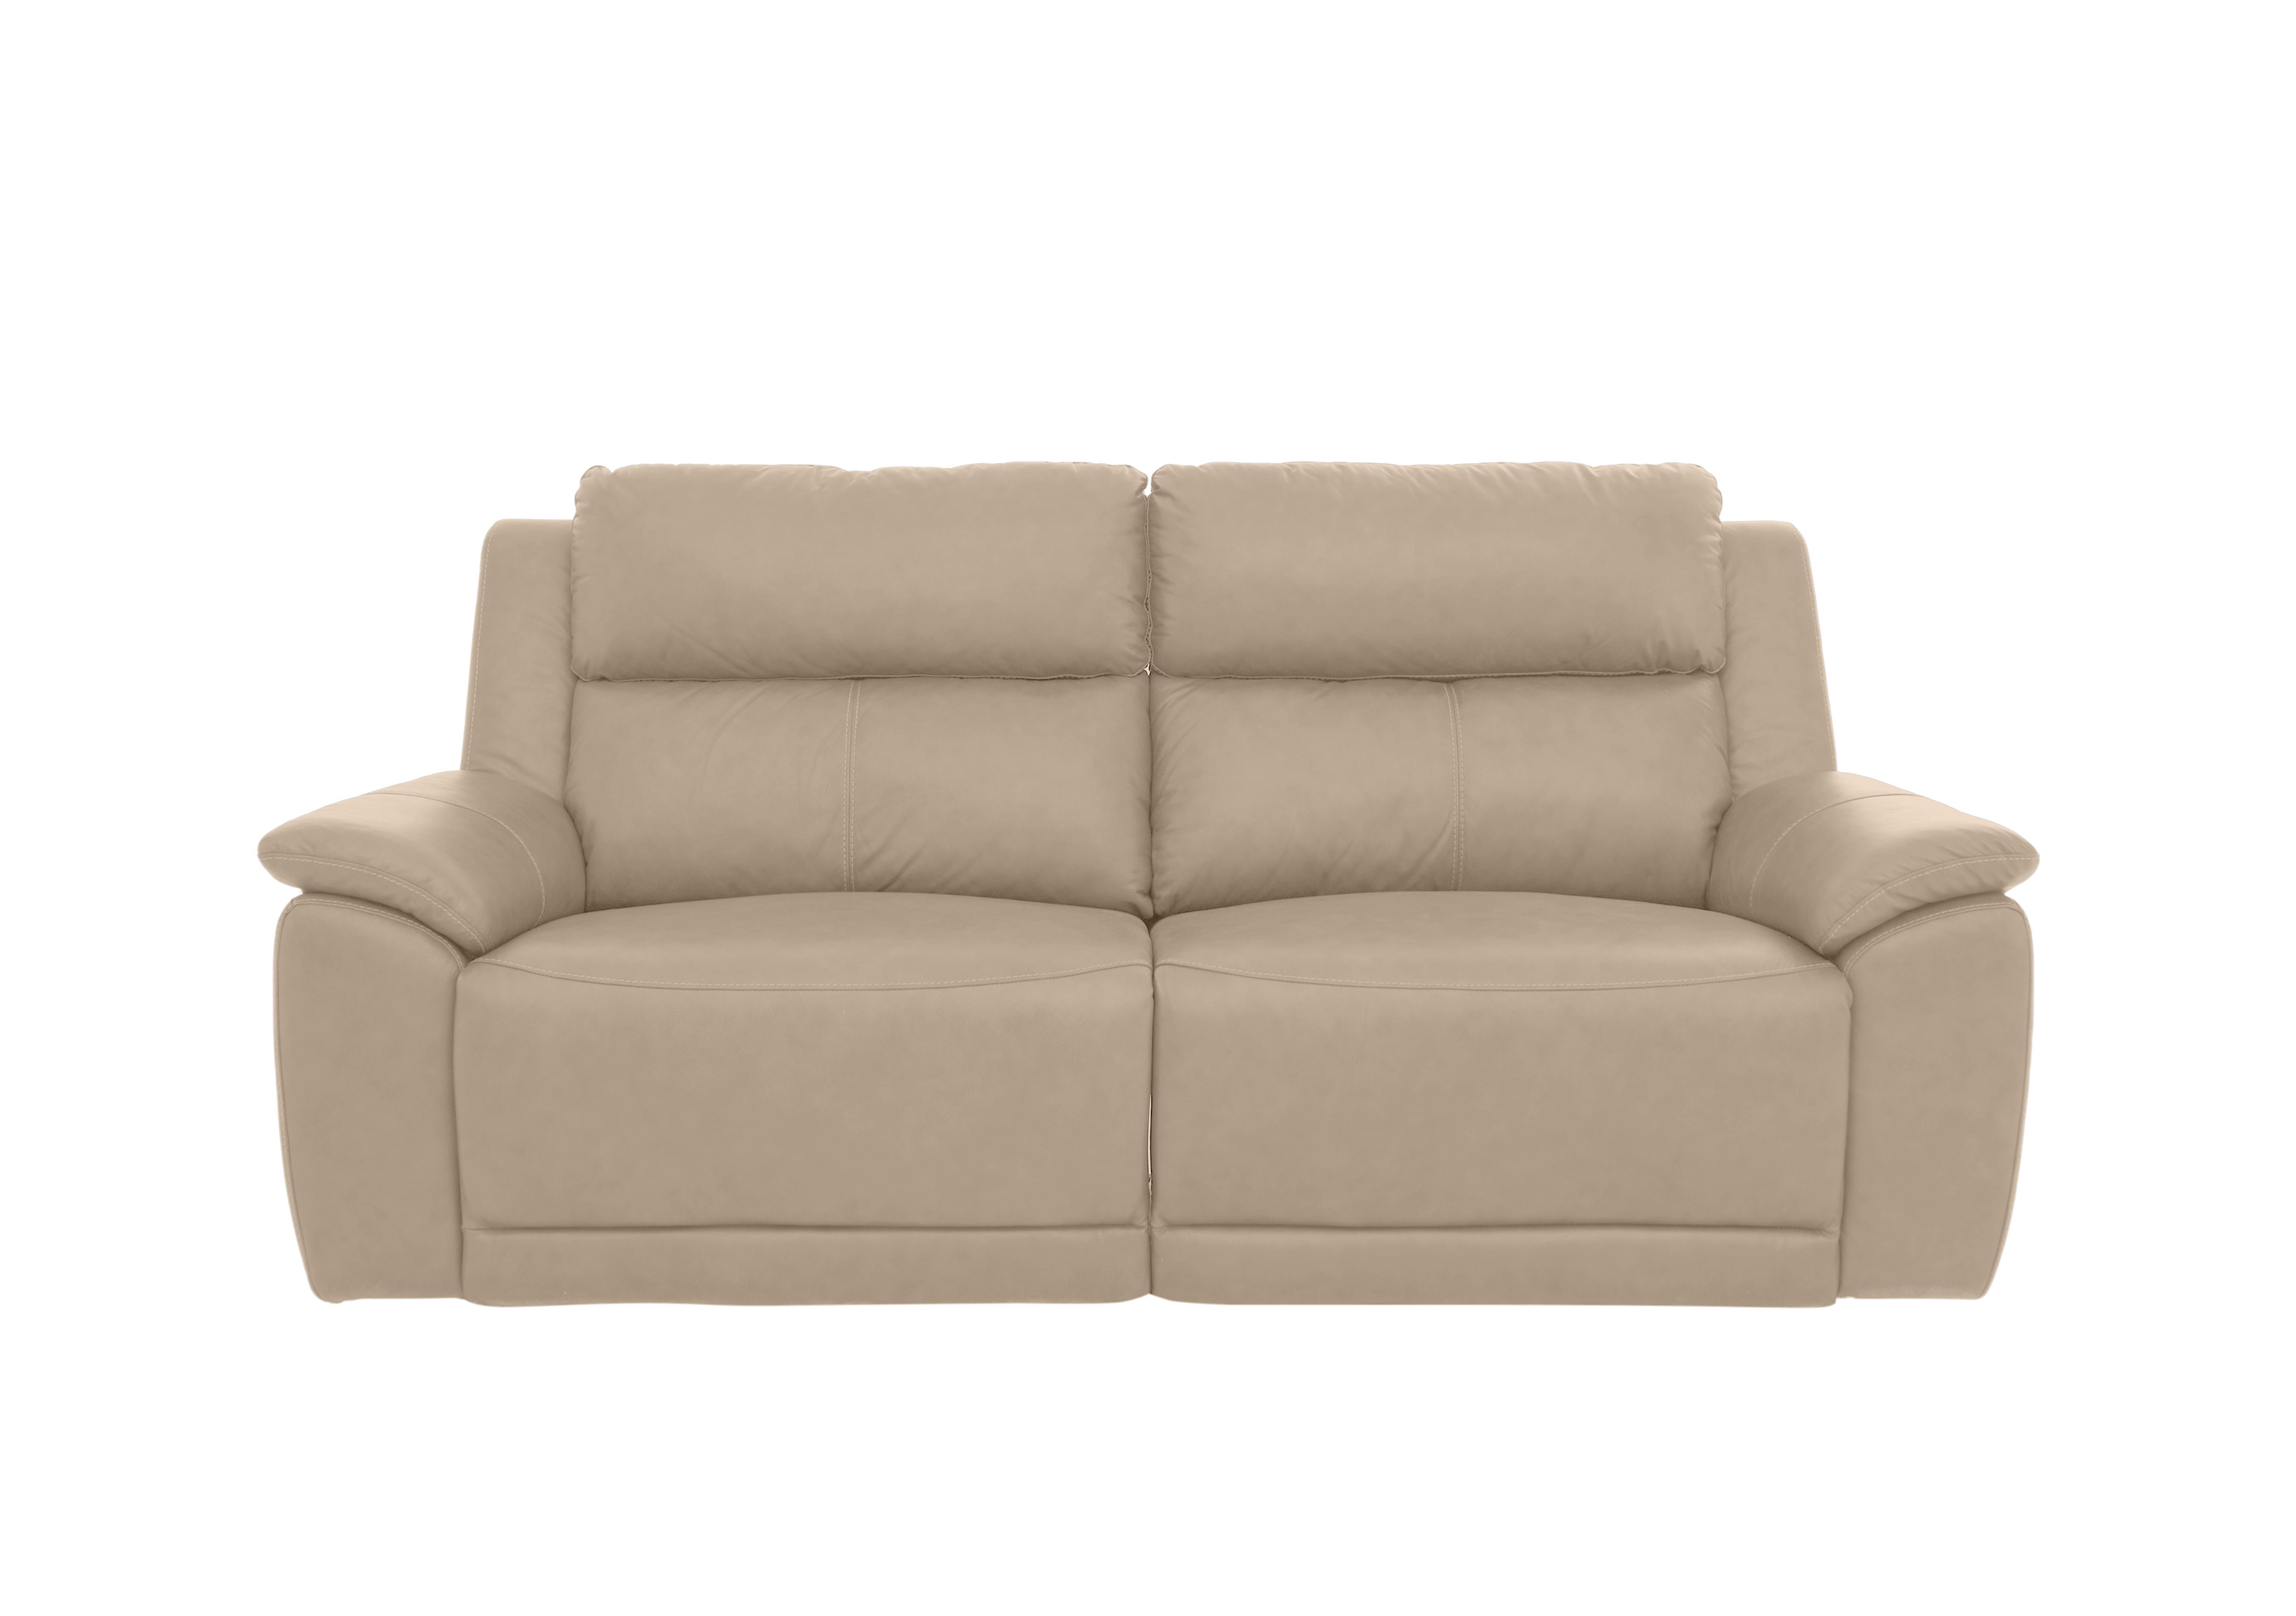 Utah 3 Seater Leather Power Recliner Sofa with Power Headrests and Power Lumbar in Pebble La-4305 on Furniture Village